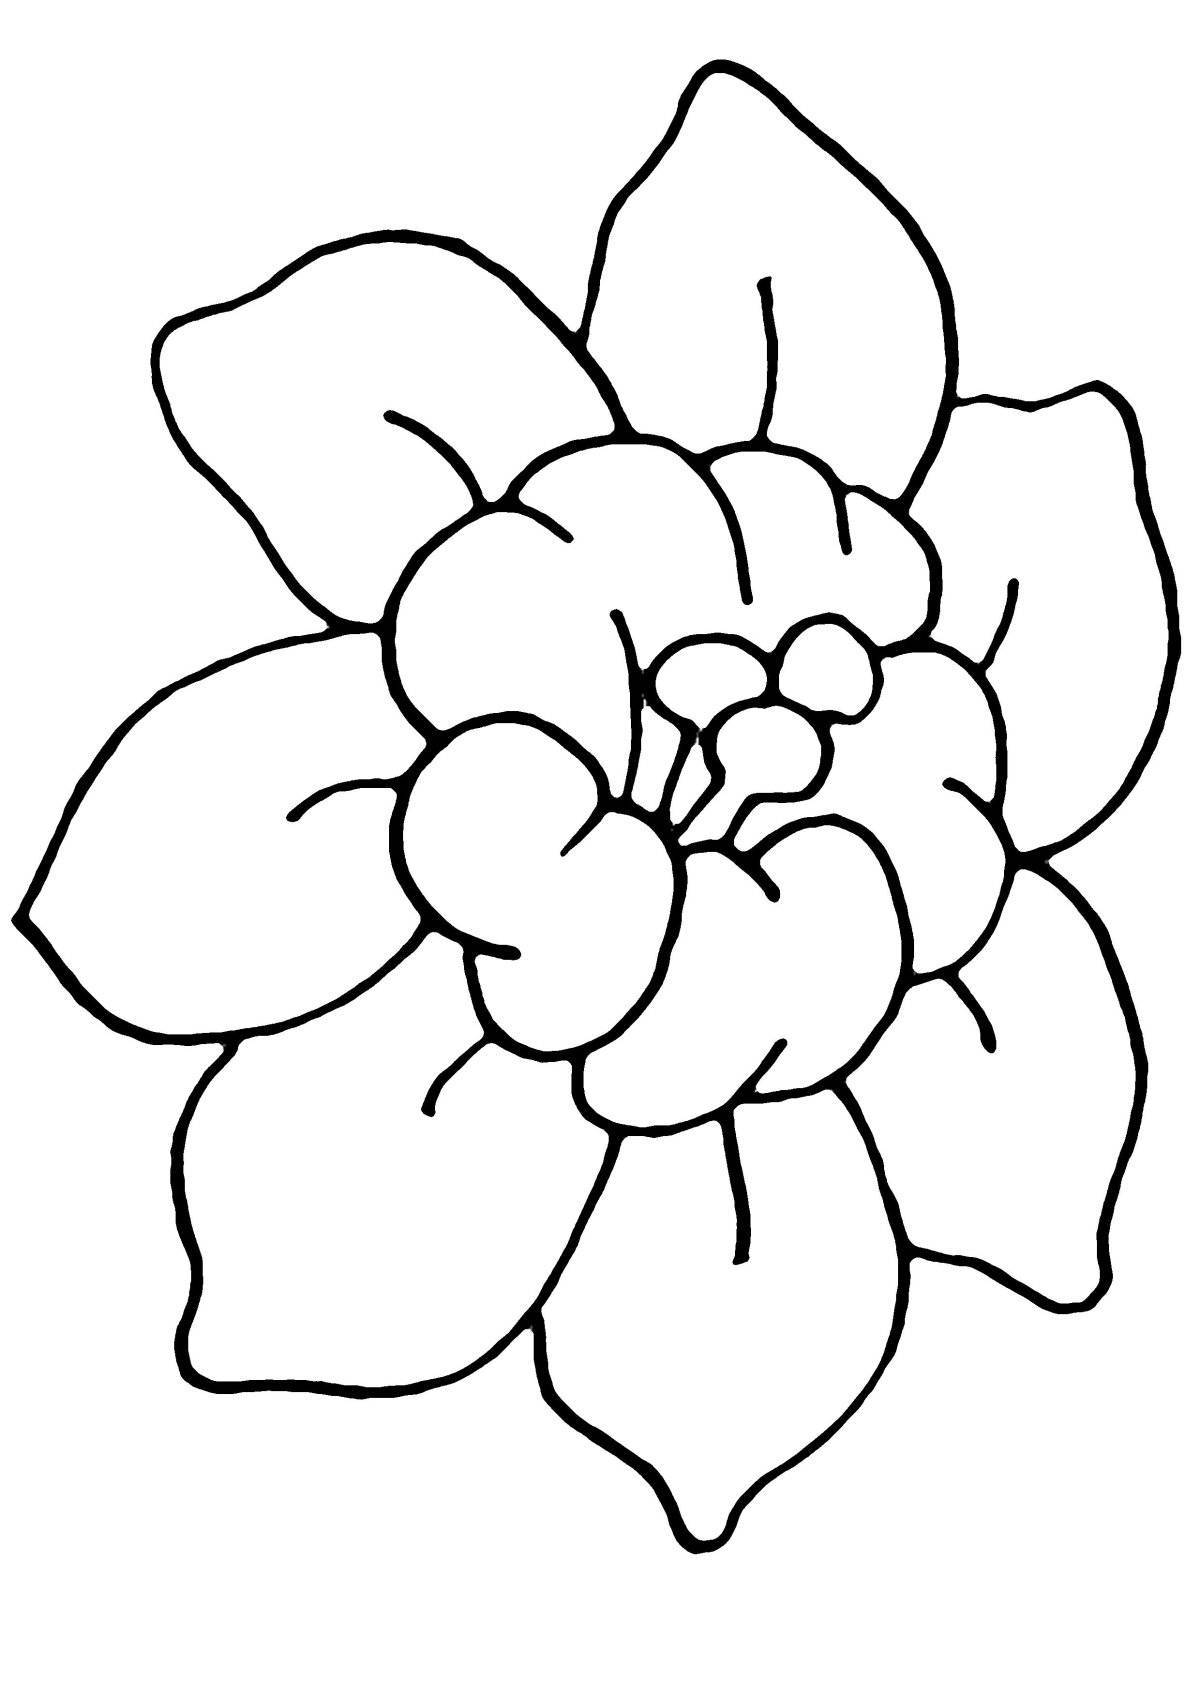 Serene coloring page beautiful big flowers